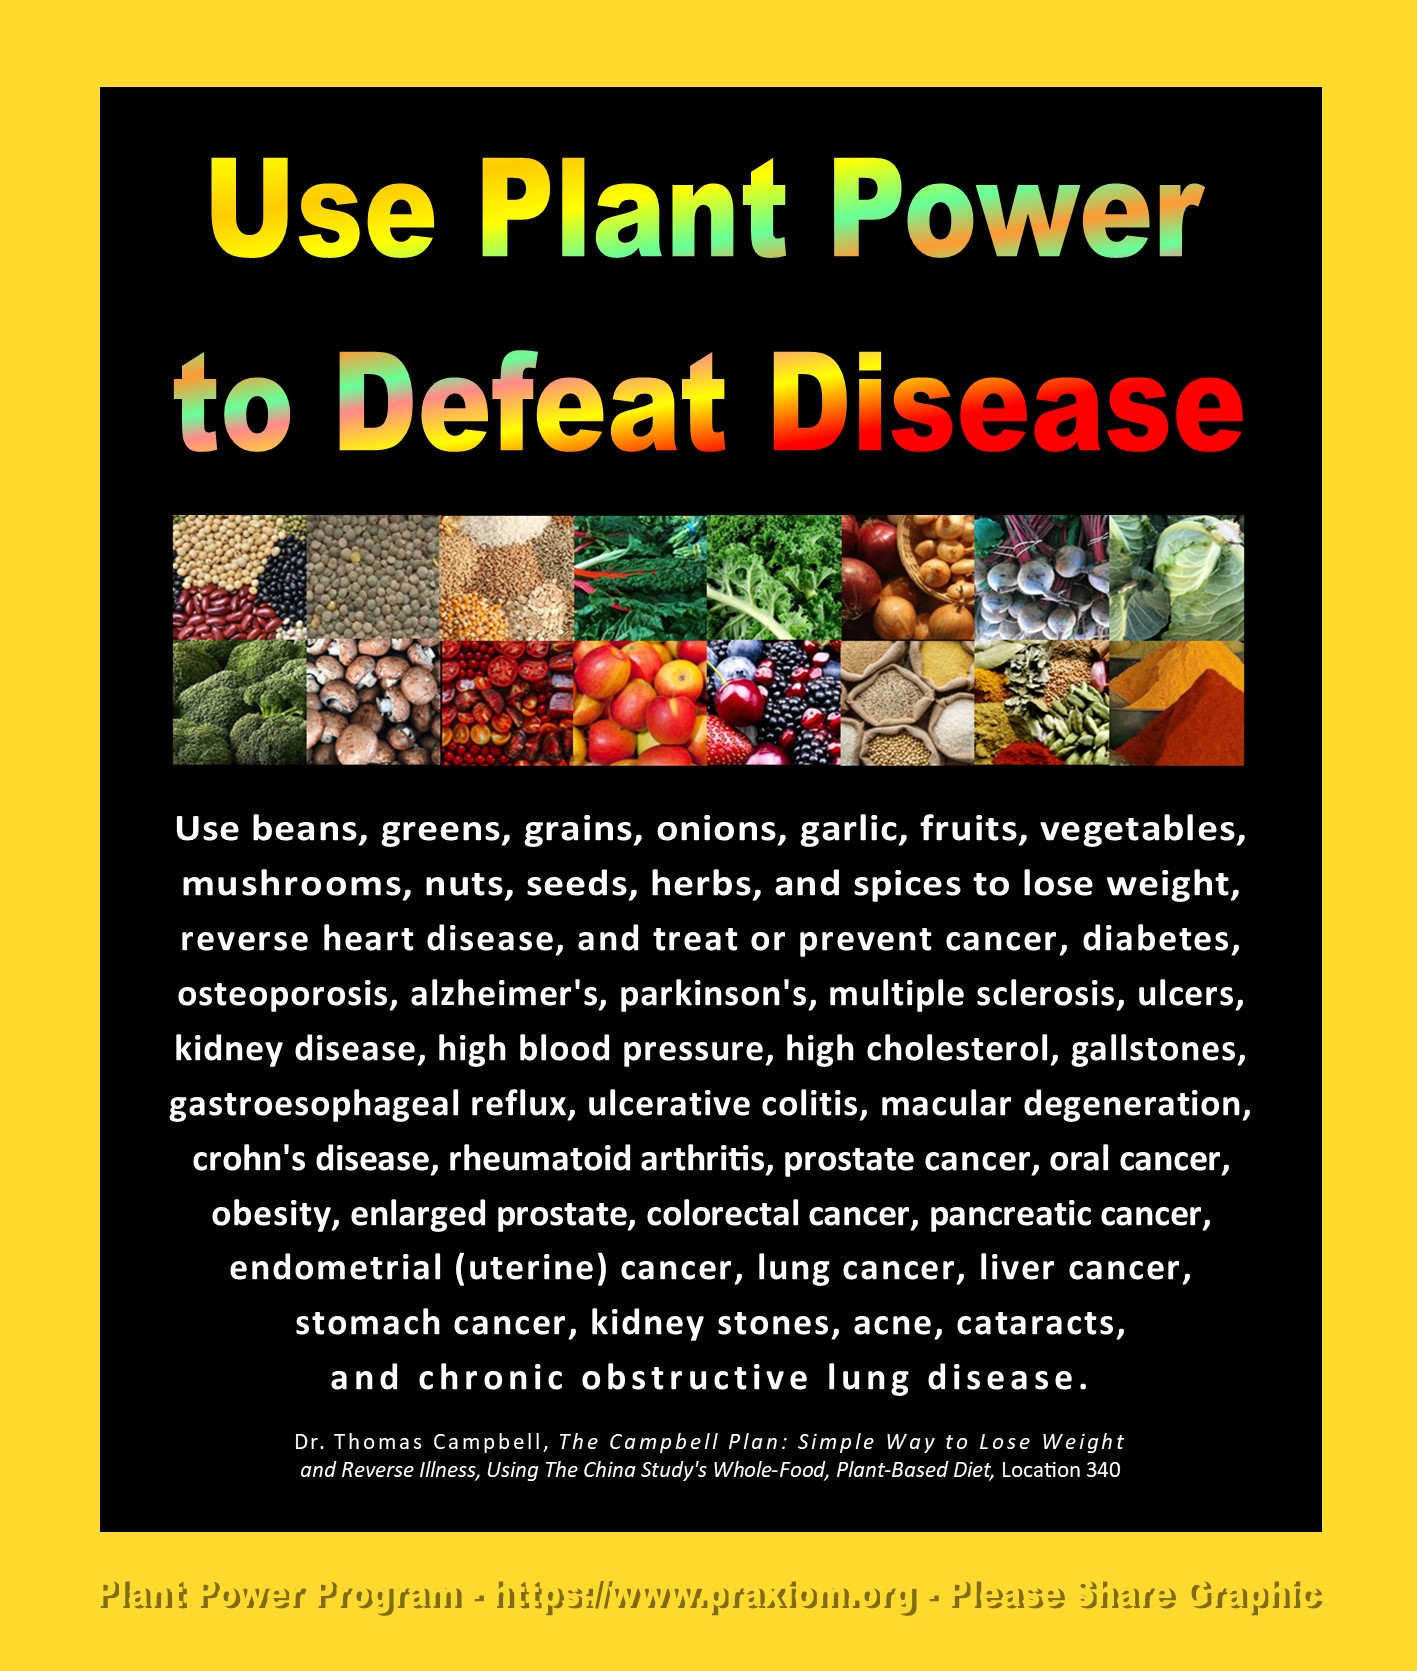 Use plant power to defeat disease